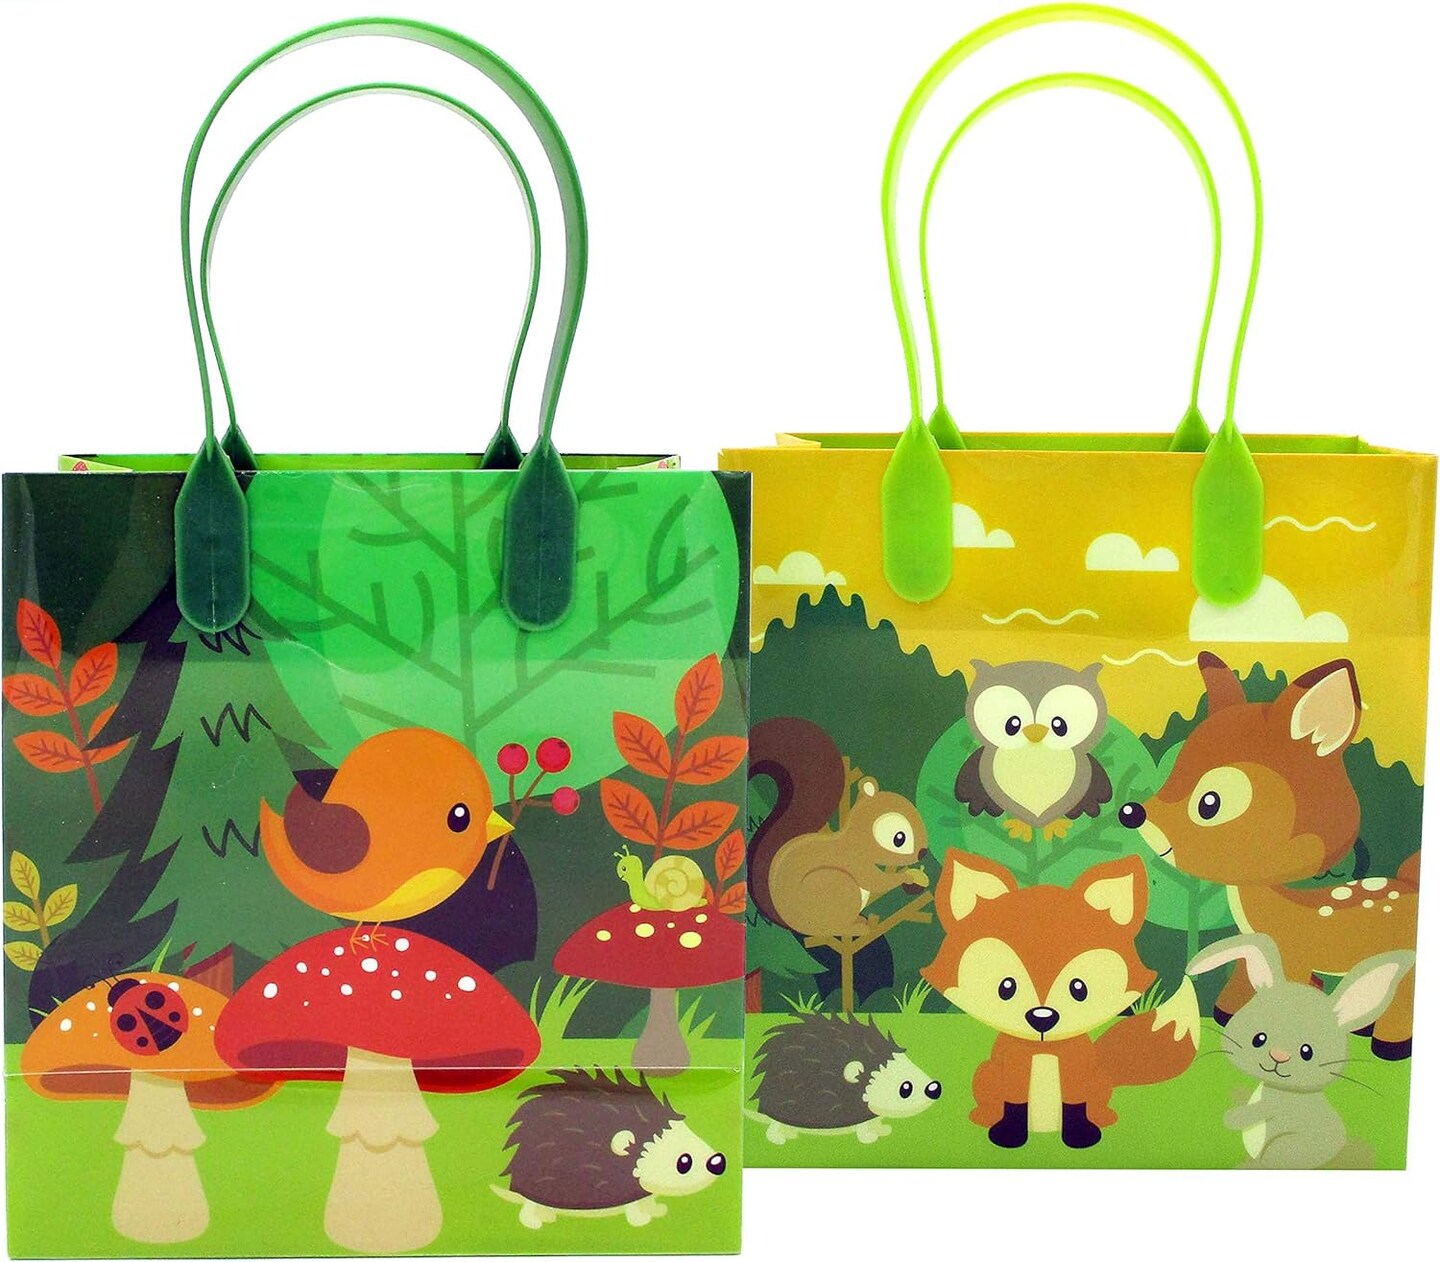 Tiny Mills Woodland Animals Forest Creatures Critters Party Favor Bags Treat Bags with Handles, Candy Bags for Birthday Party Bags Party Supplies,12 Pack